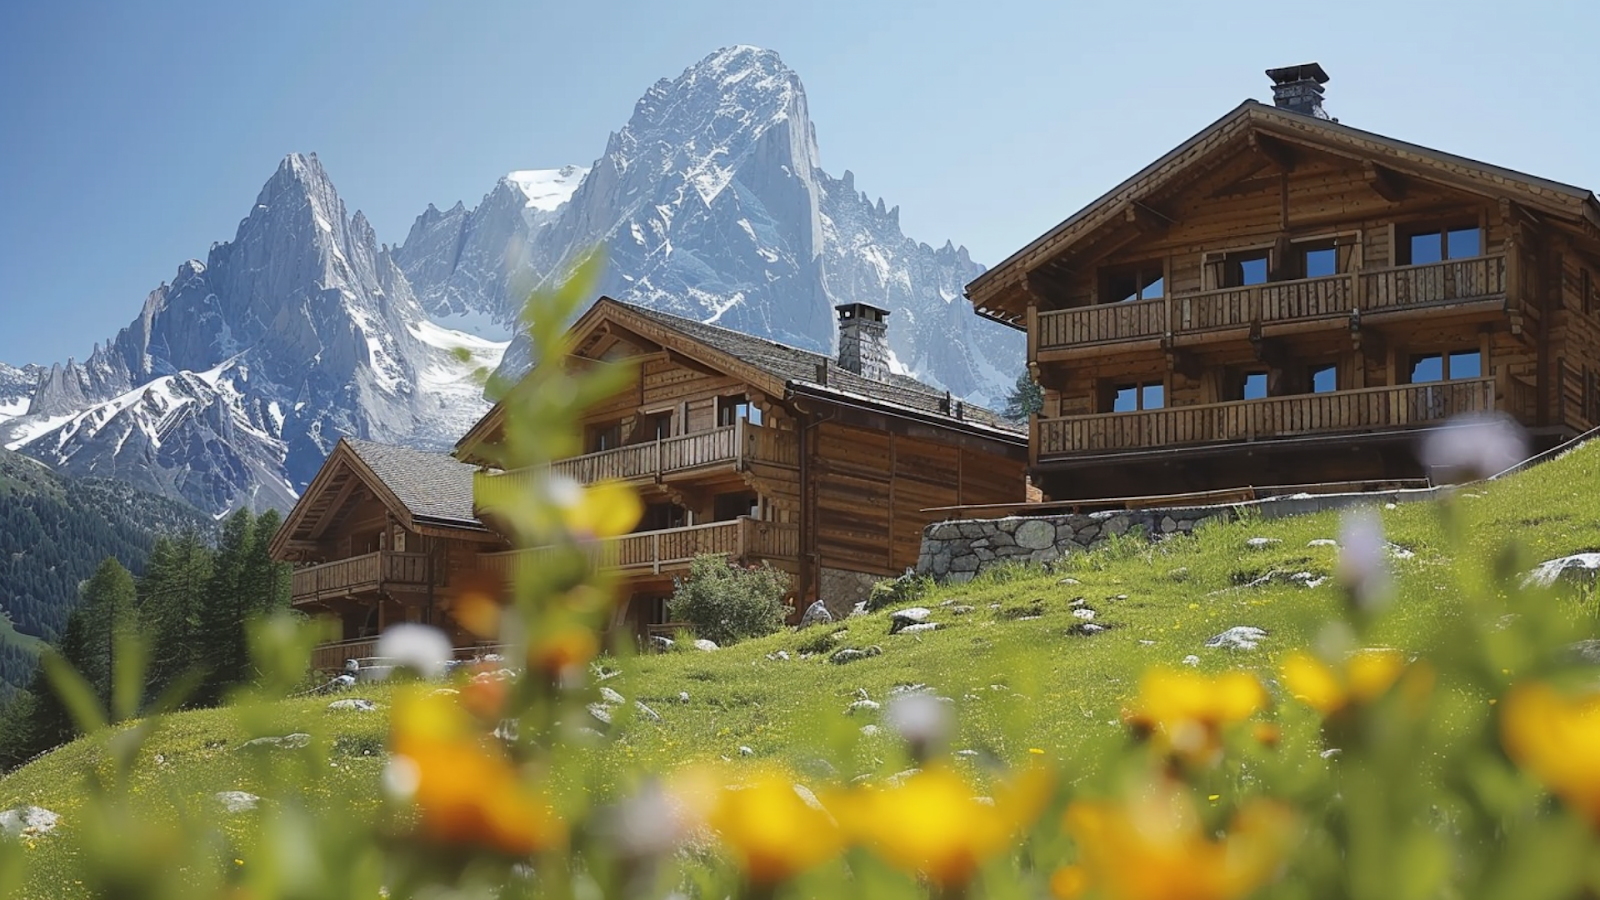 A spacious ski chalet in Courchevel, France, with flowers in the foreground